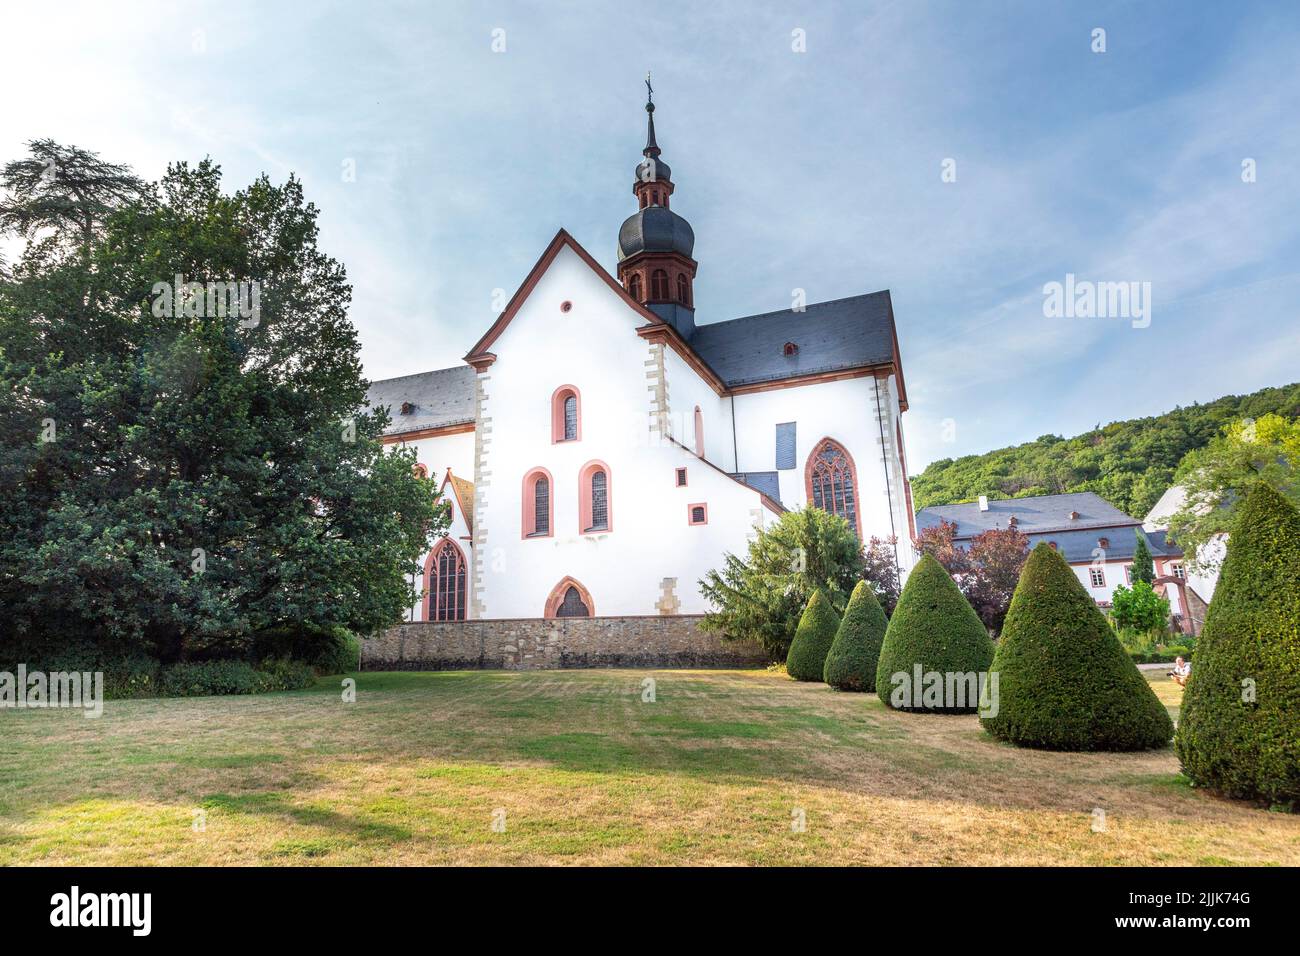 outdoor view of famous Eberbach Abbey in Germany Stock Photo